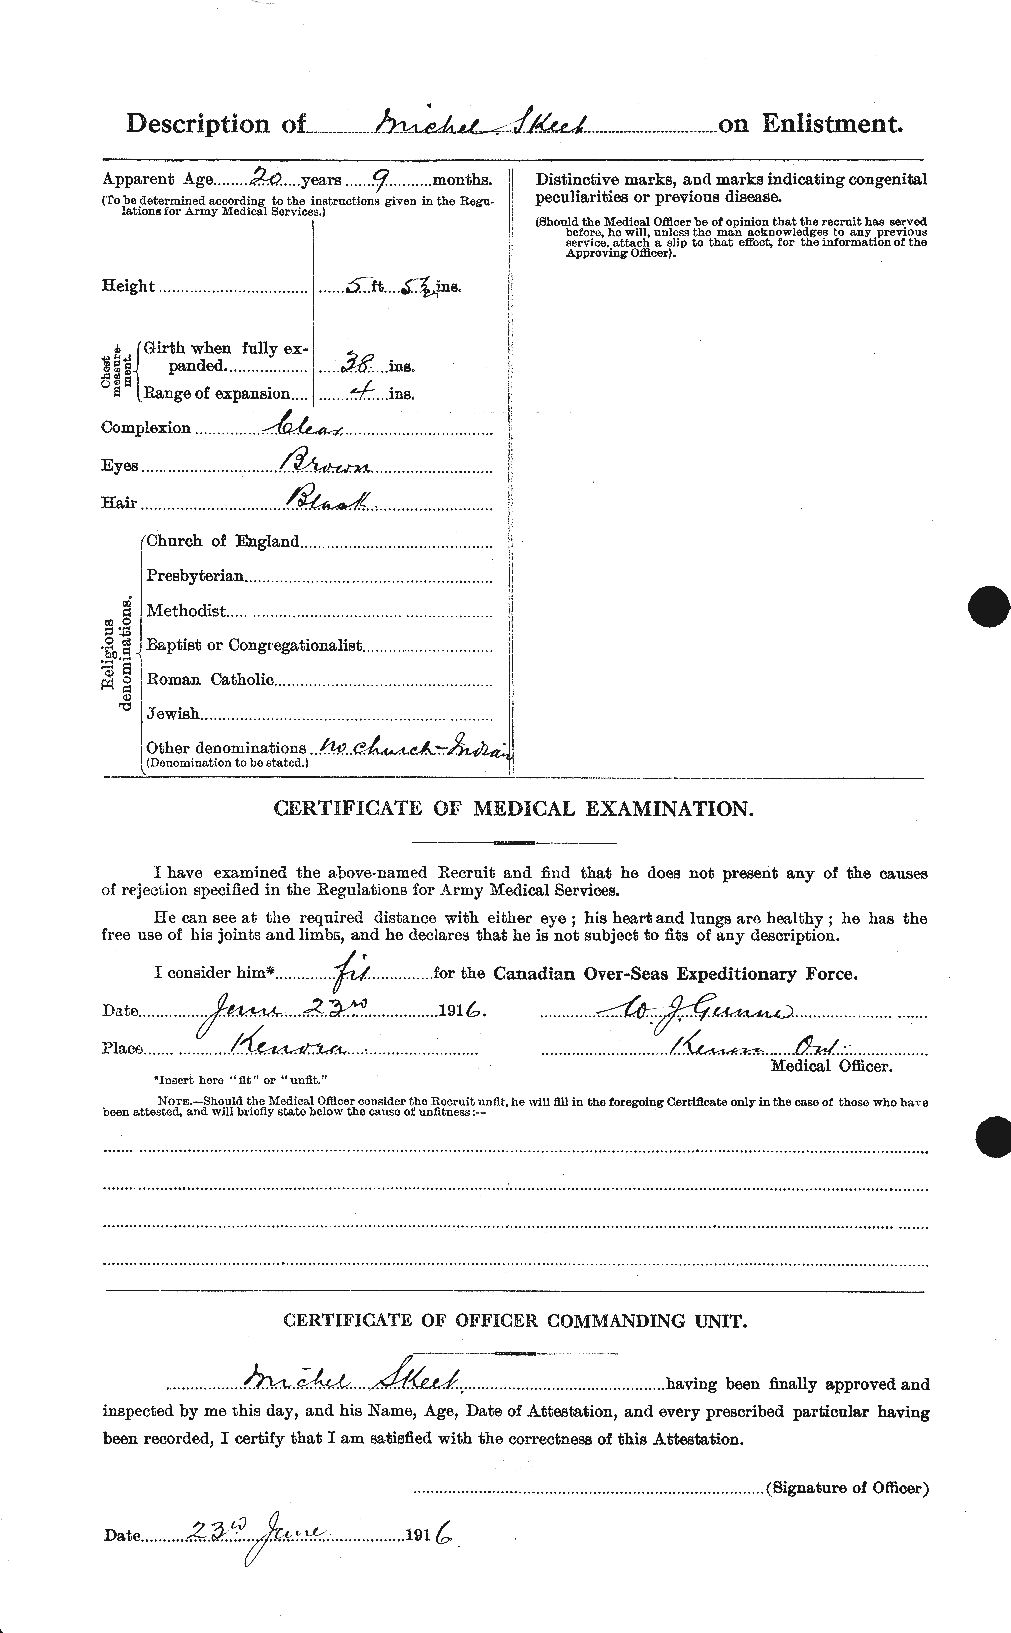 Personnel Records of the First World War - CEF 100954b